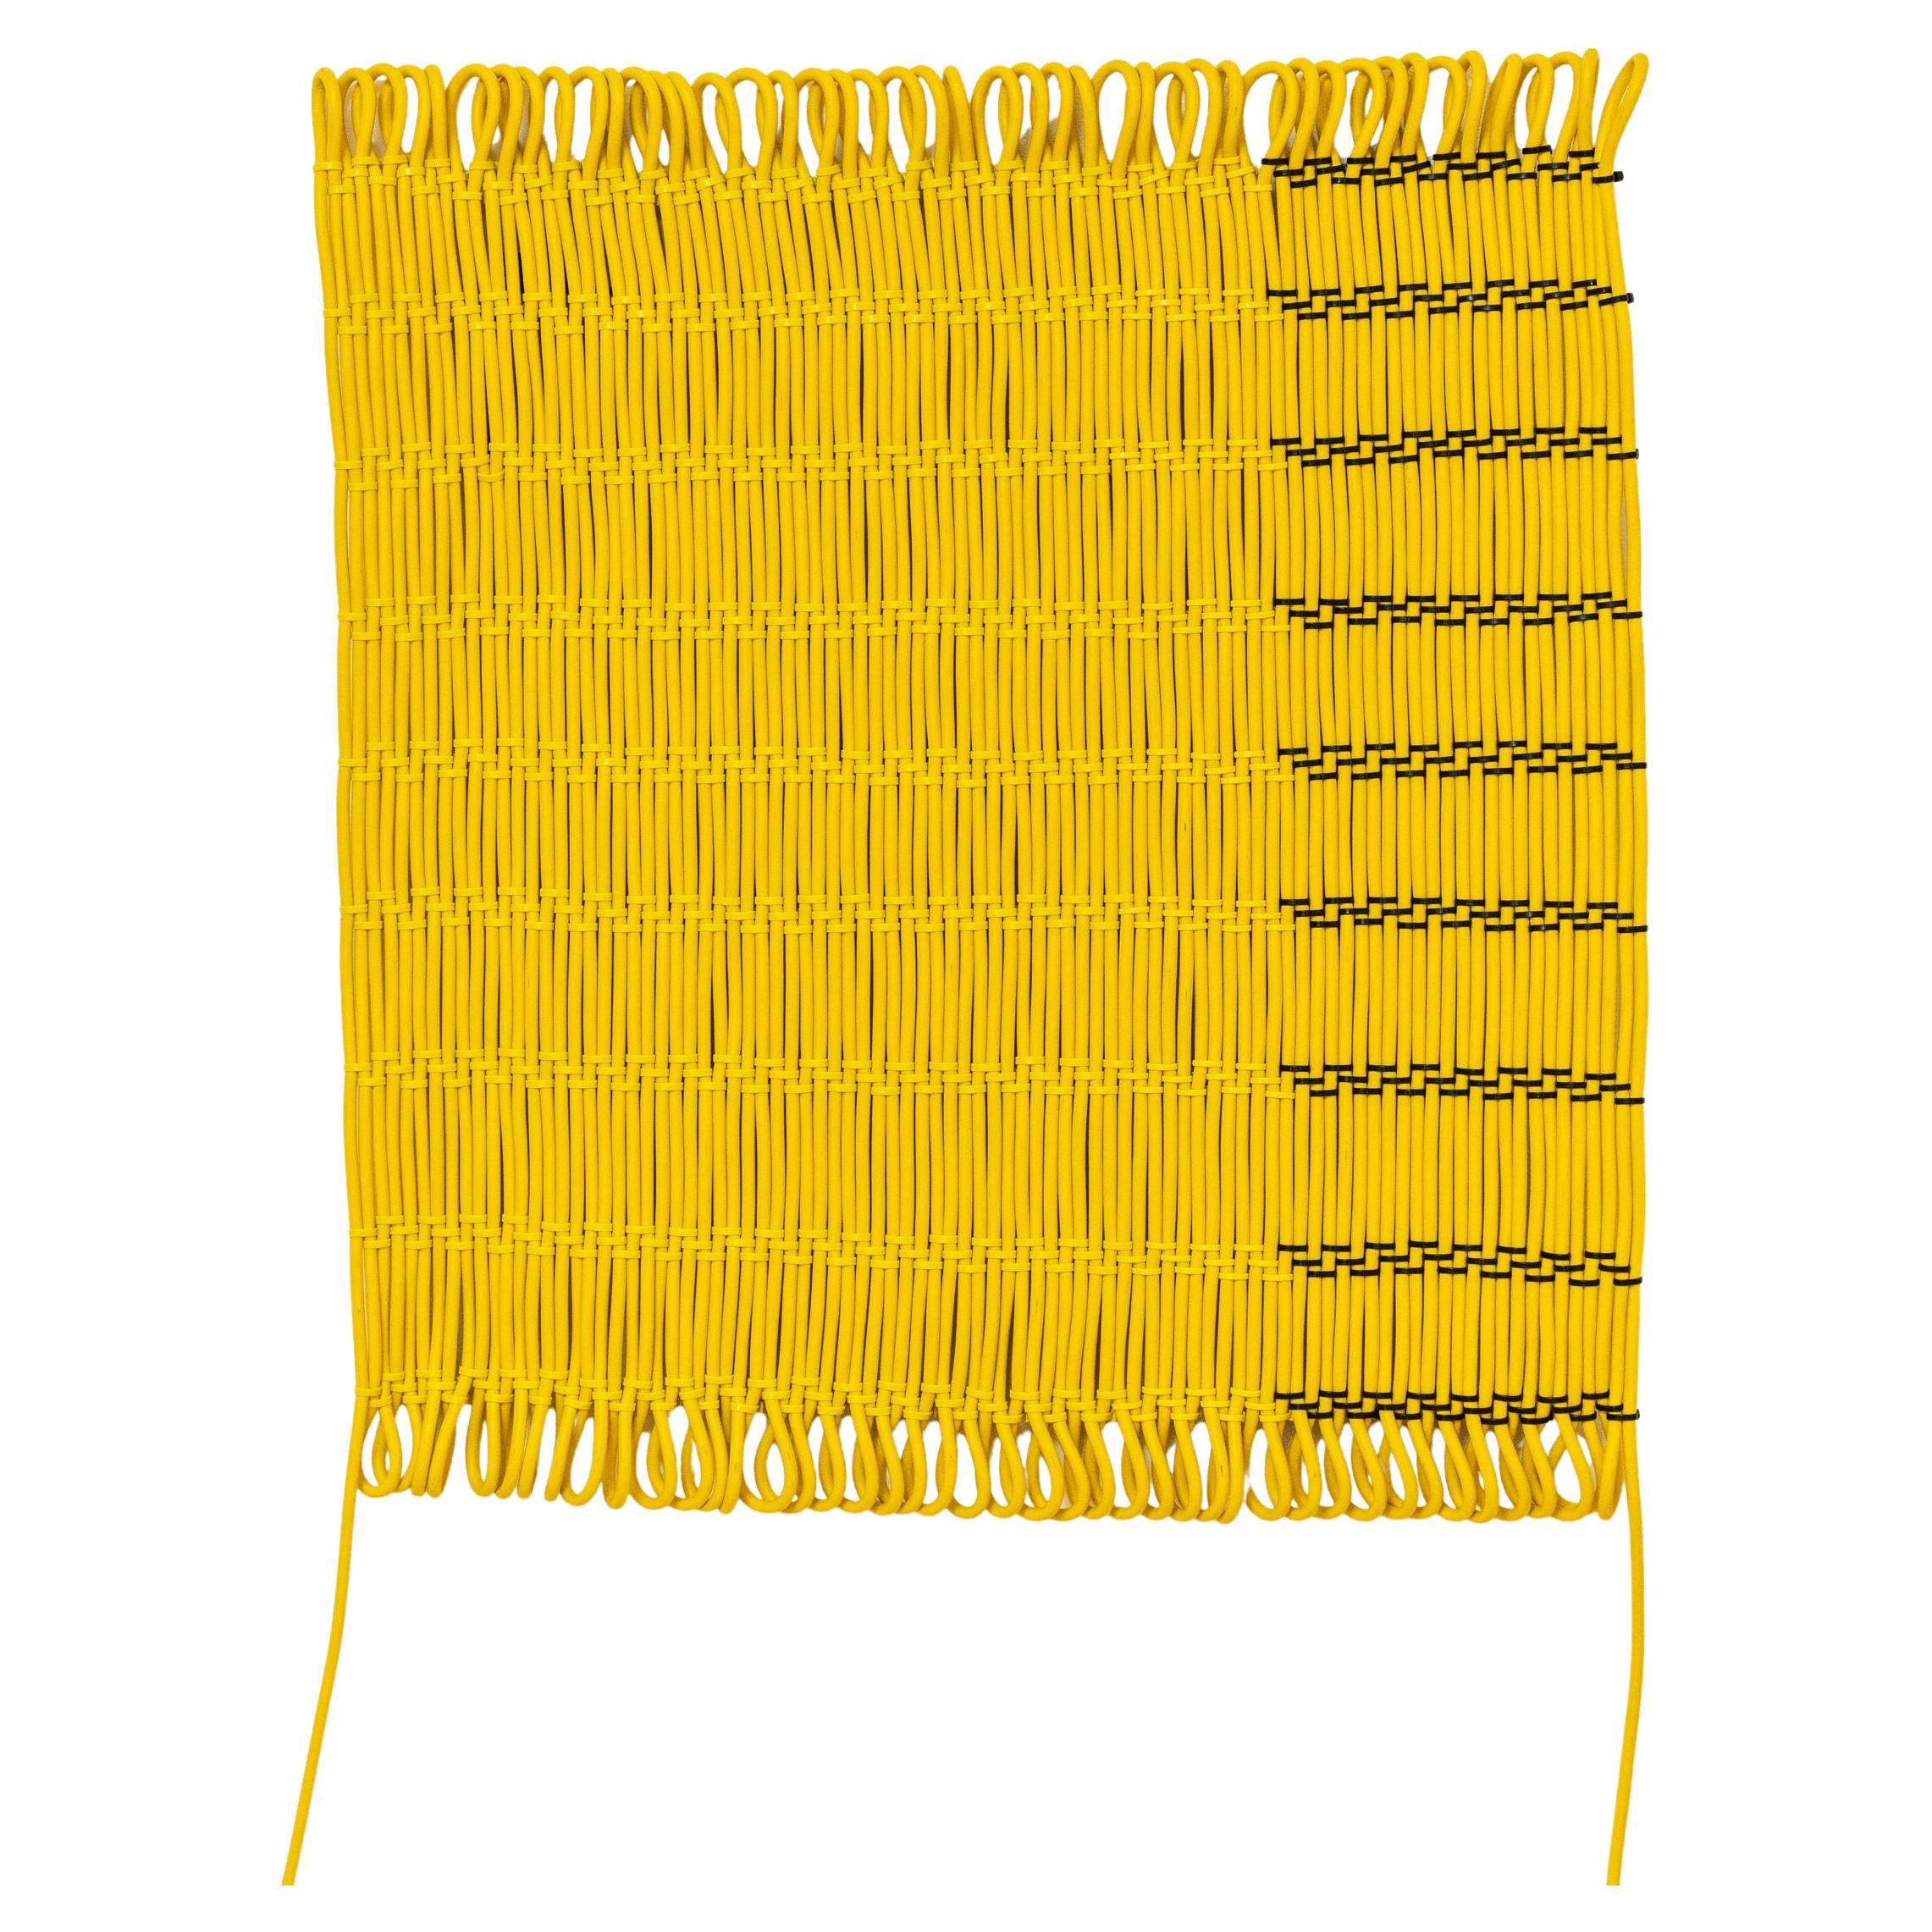 100 Meter Cable Wall Rug by Tino Seubert For Sale